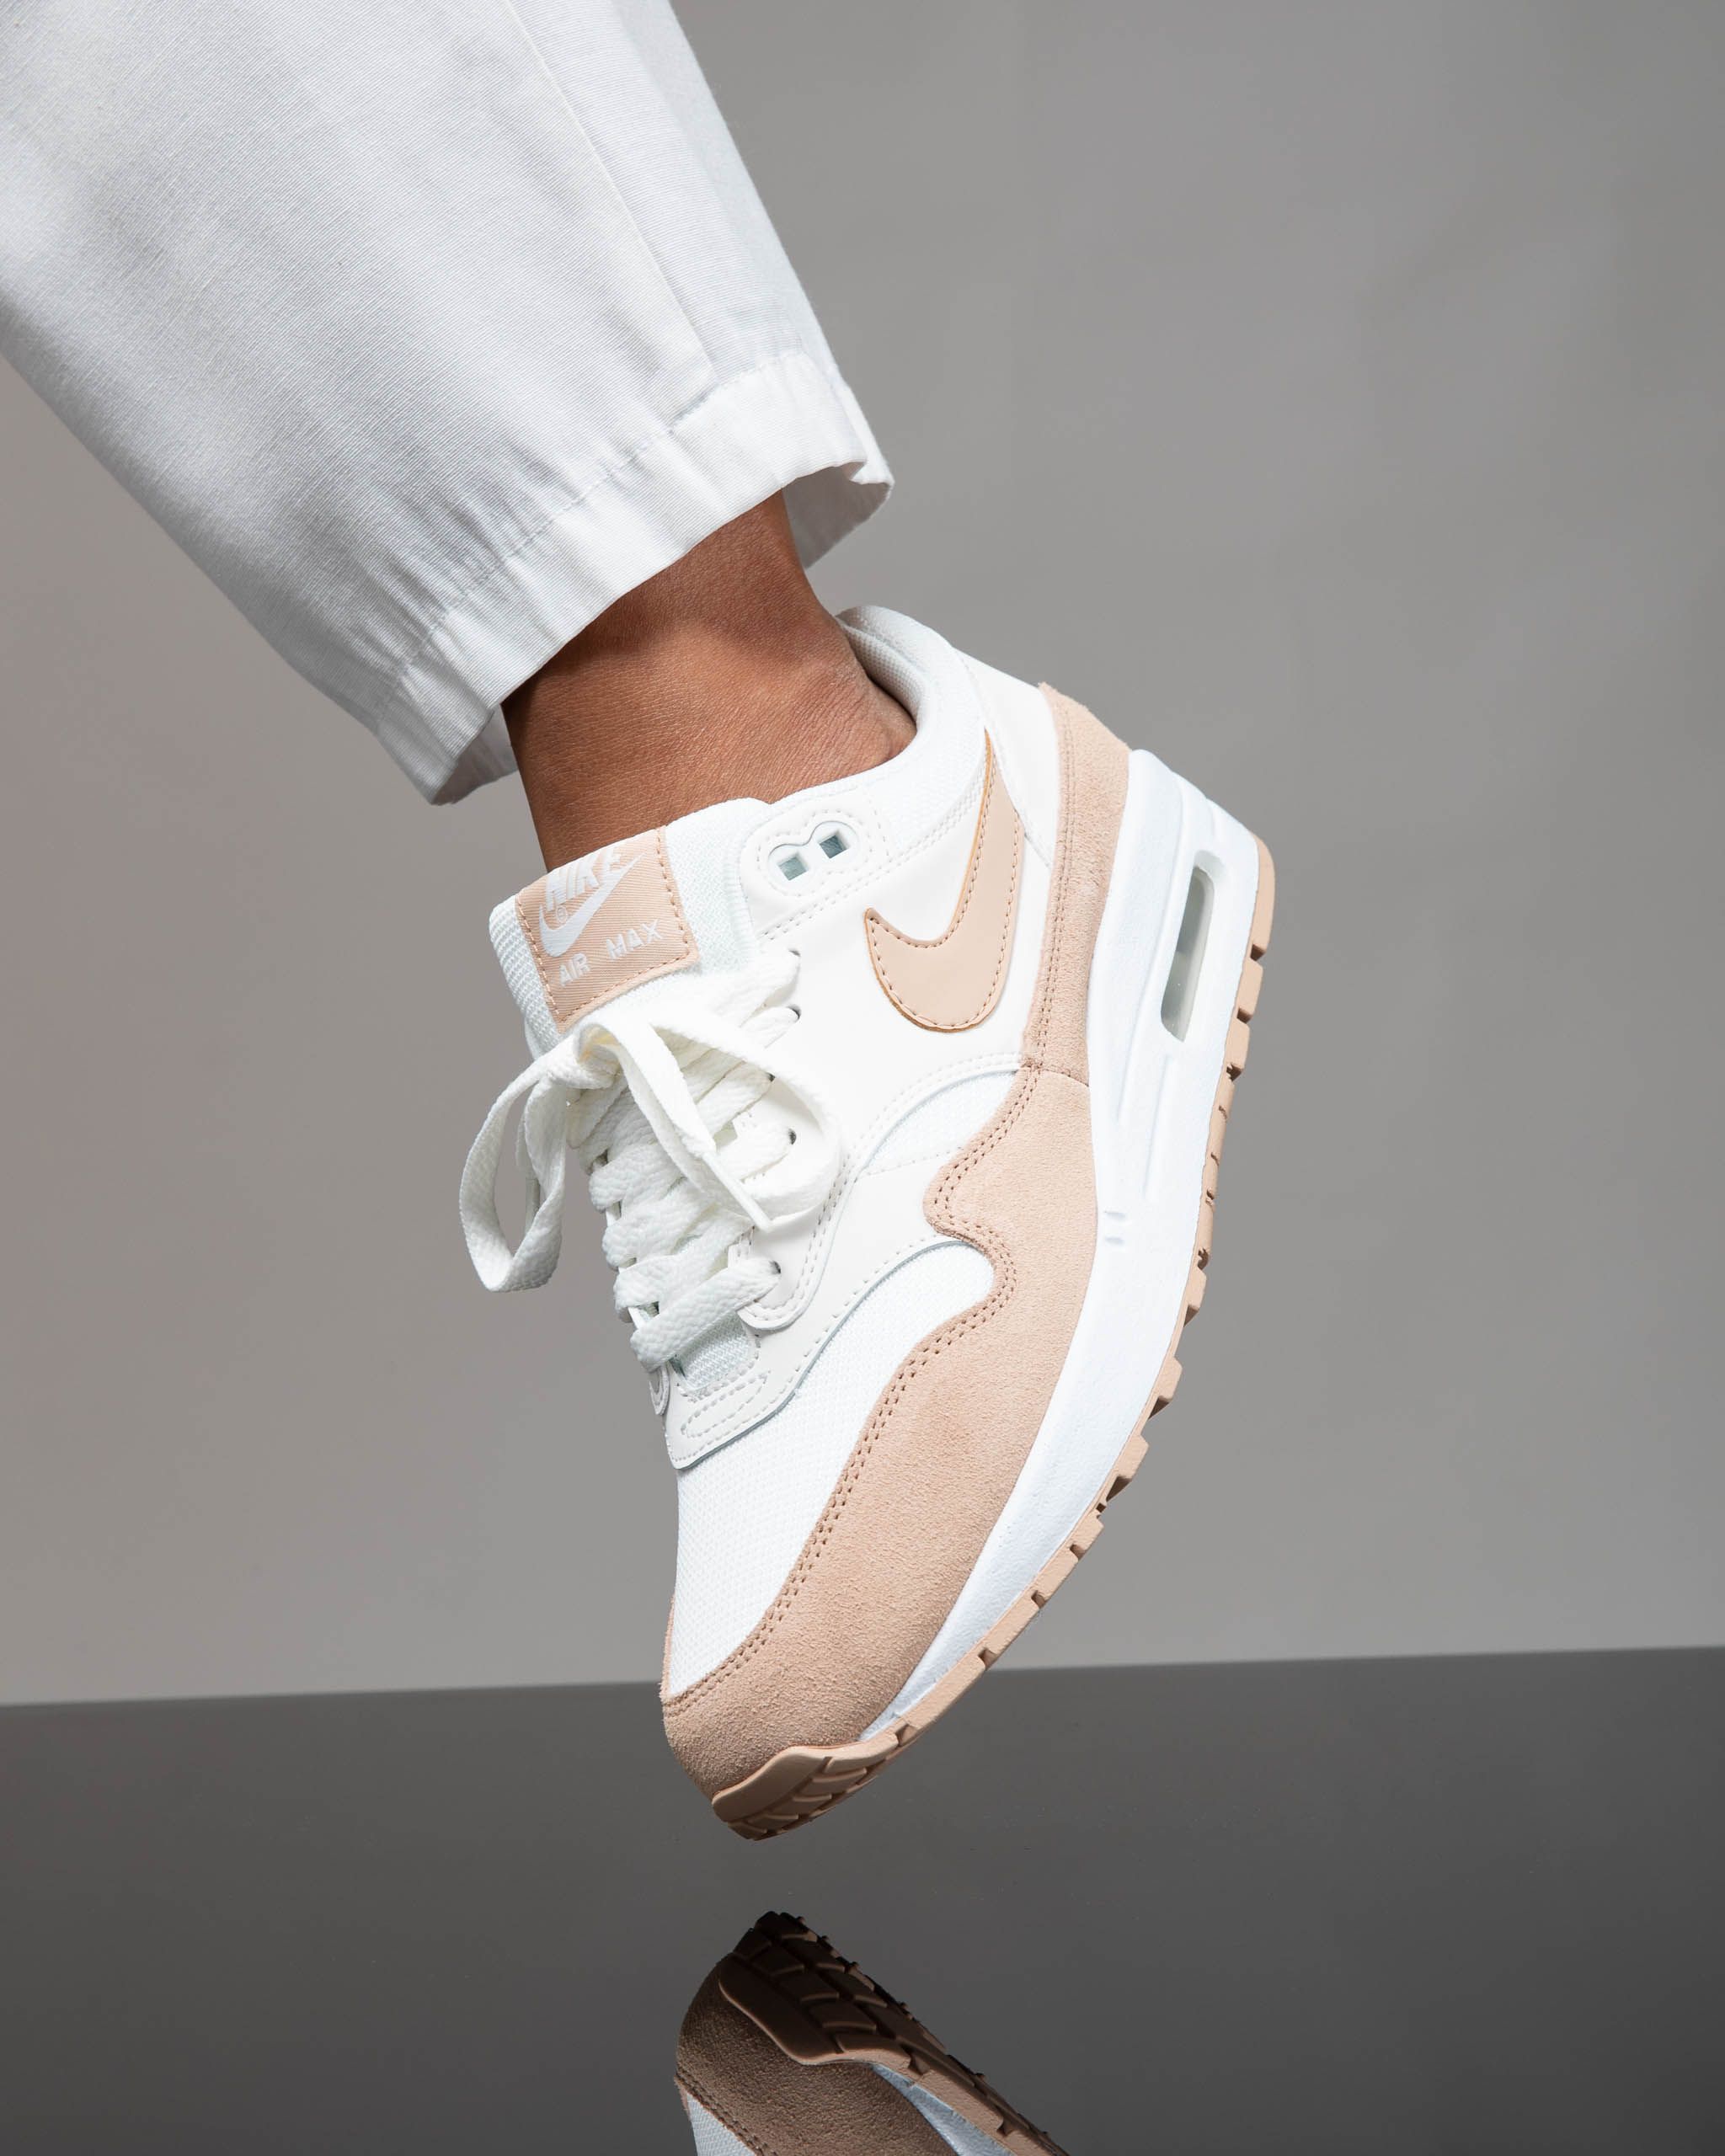 Titolo on Twitter: "soft tones on this Women's Nike Air Max 1. available for purchase ➡️ https://t.co/nUmCyOObkK US 5.5 (36) - US 10 (42) style code 🔎 319986-120 #nike #nikeairmax1 #airmax1 #